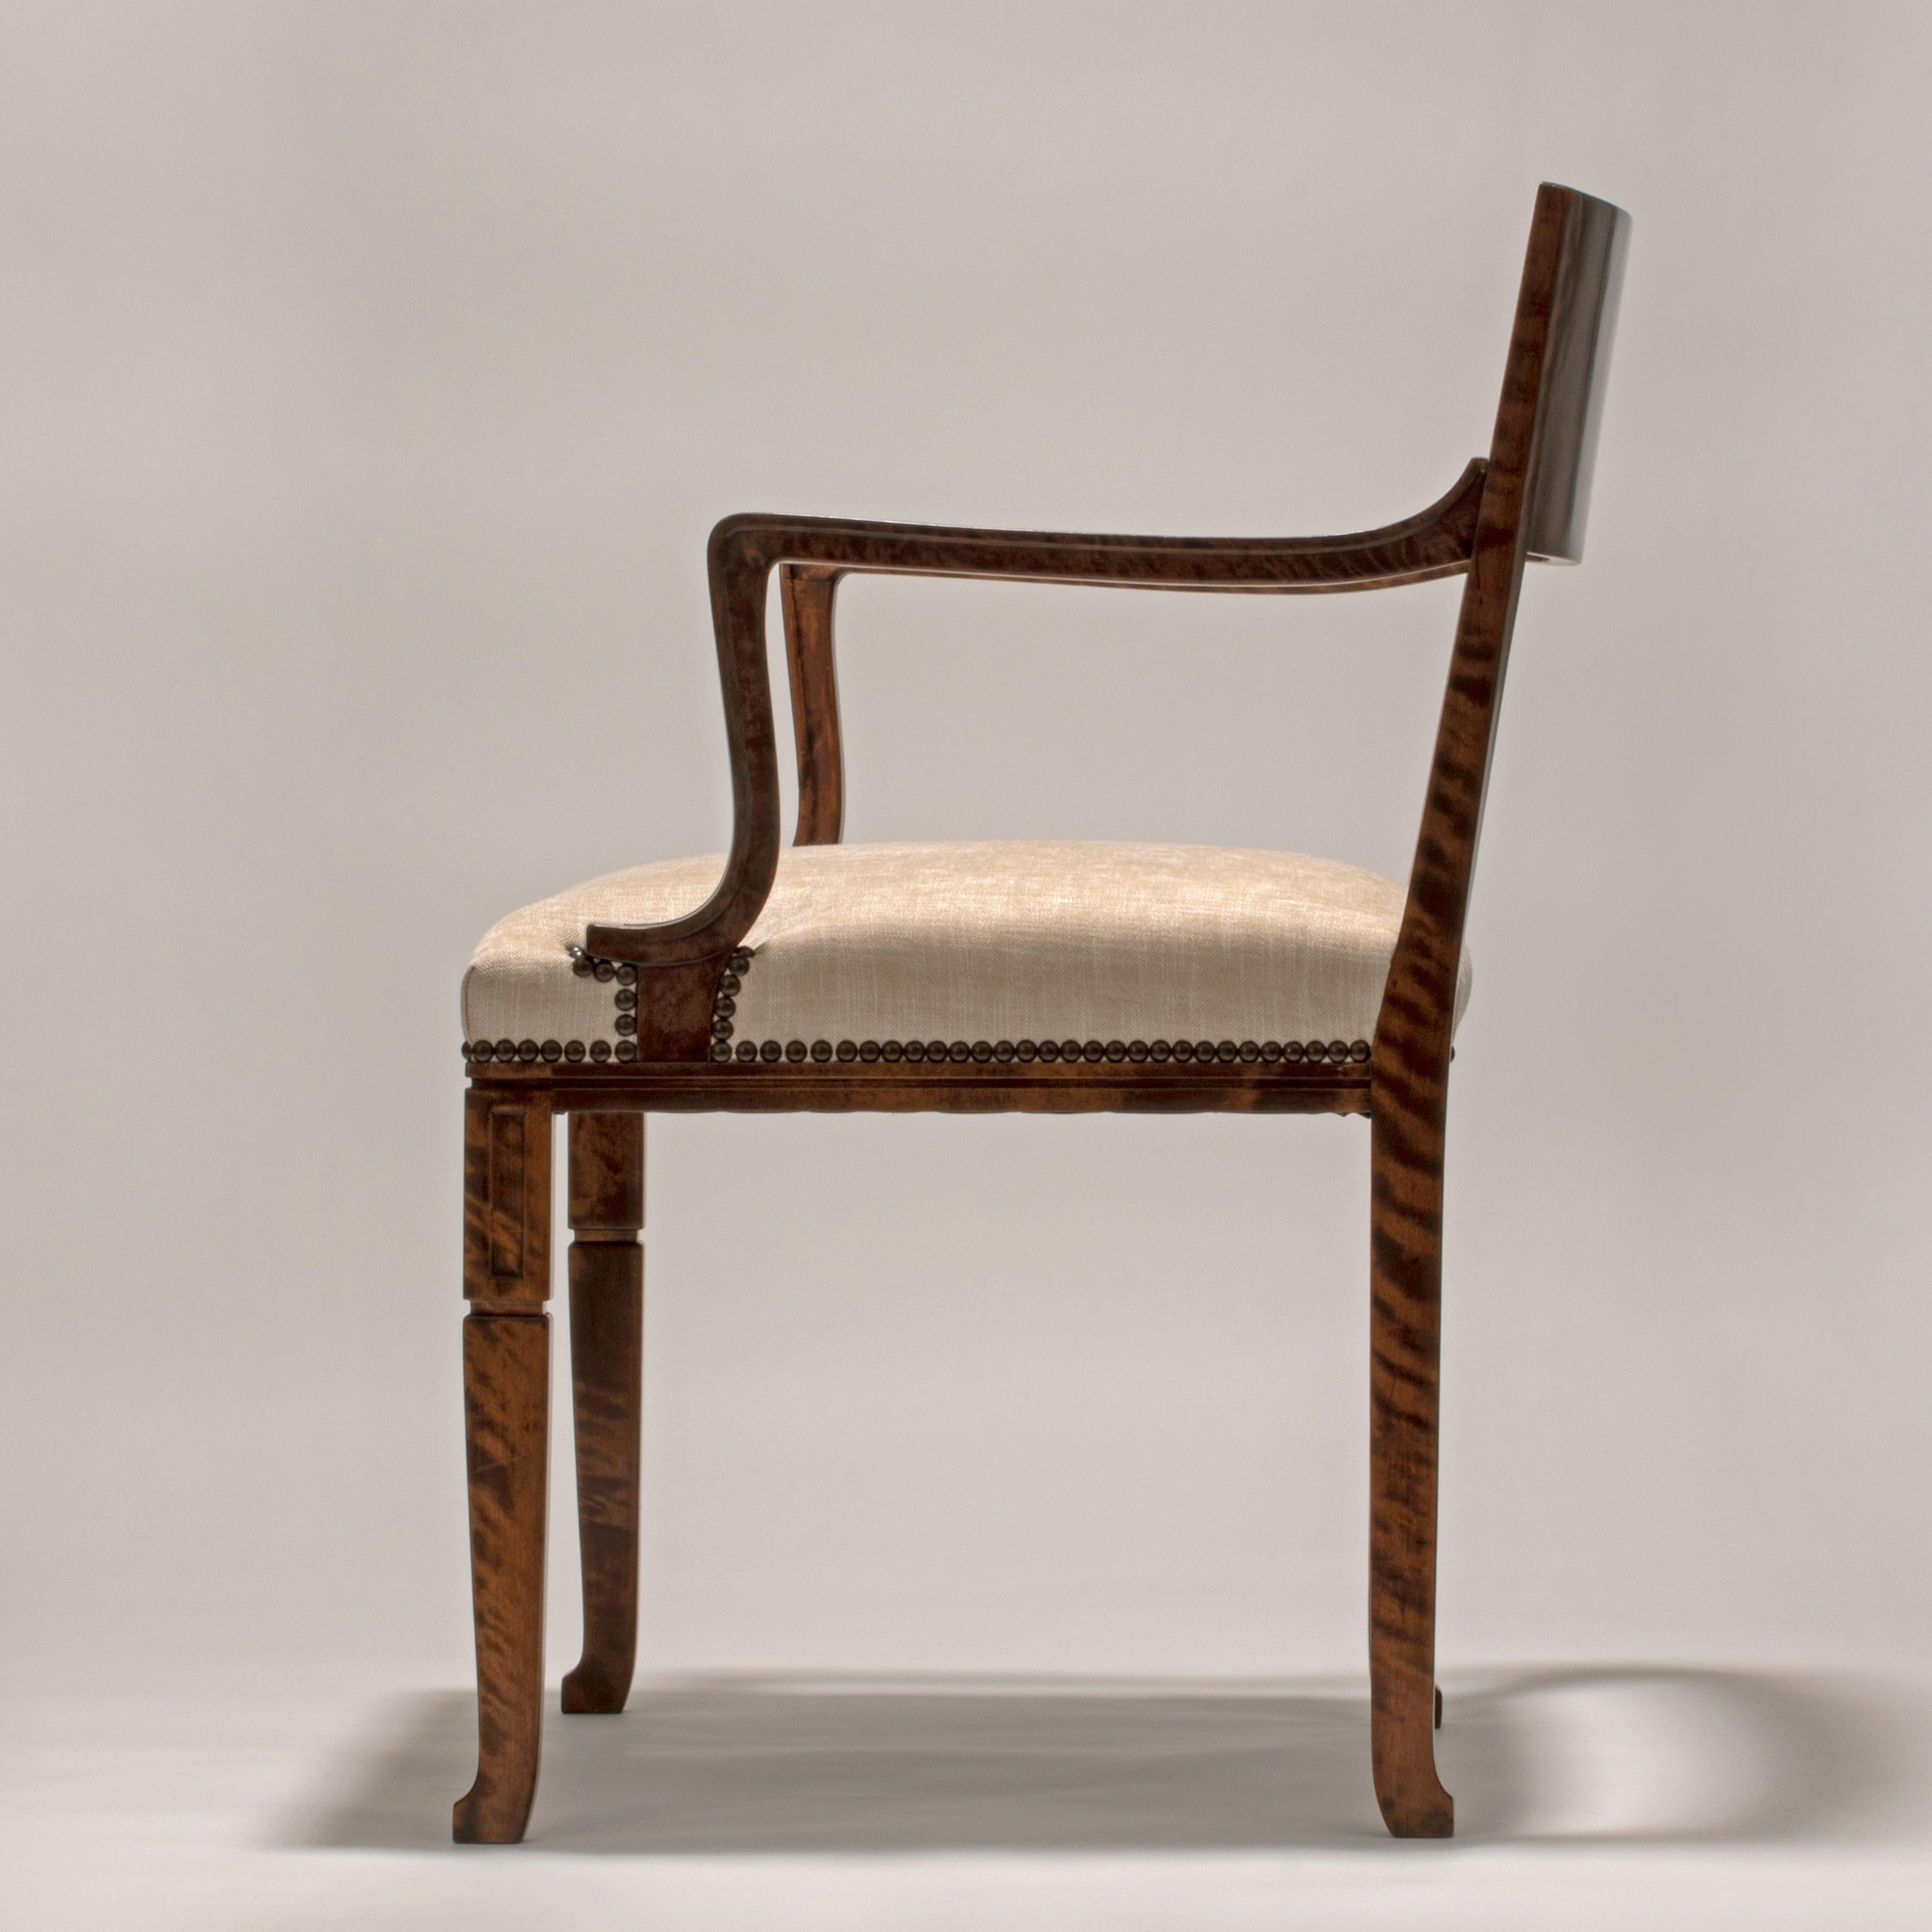 The concave back centering a parquetry panel, issuing two sweeping armrests flanking a wide upholstered seat, above a fluted apron on rectangular legs, the front two legs surmounted by block capitals, terminating in stylized paw feet. Manufactured